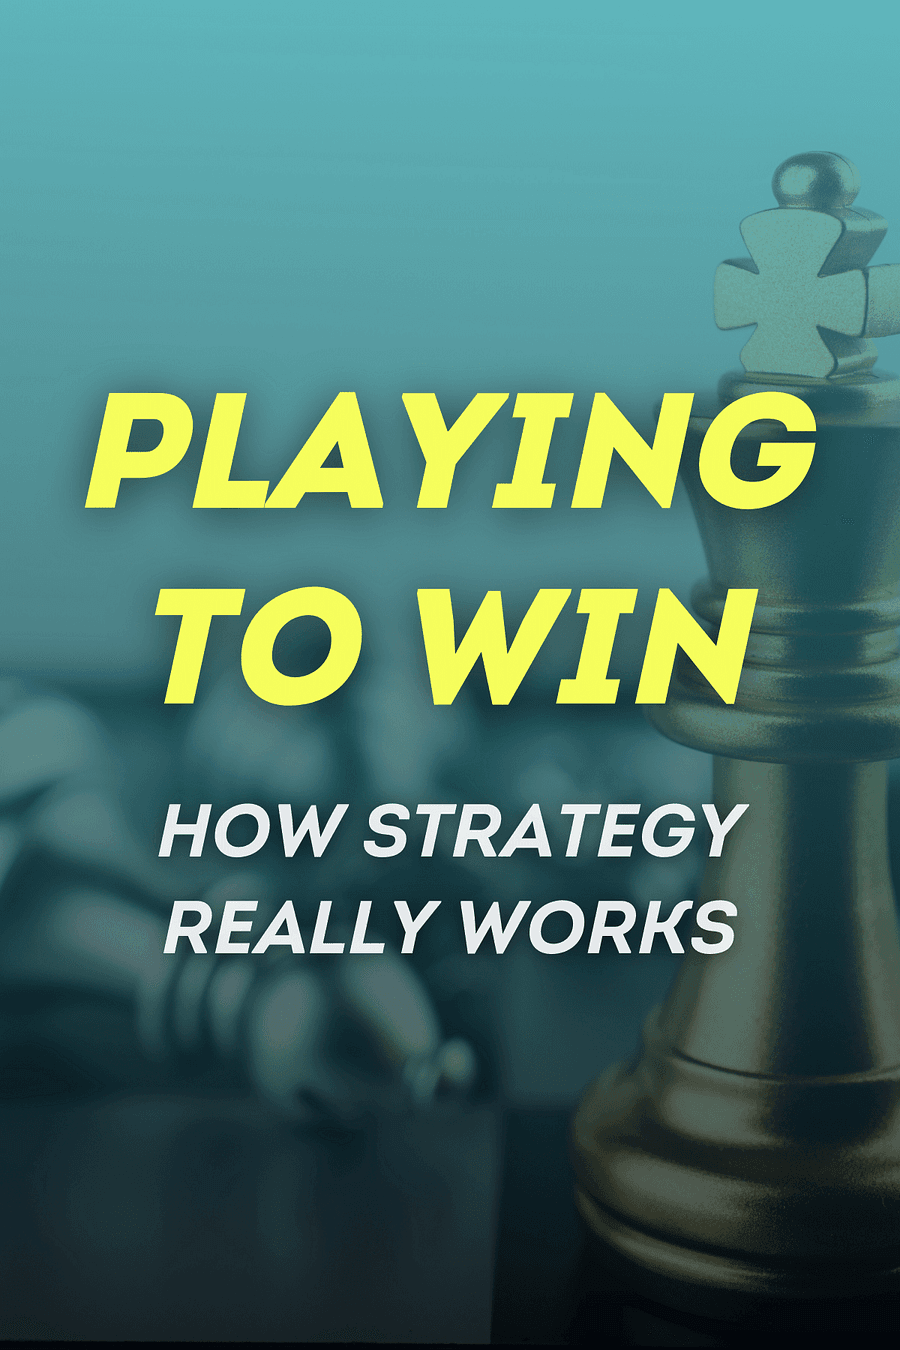 Playing to Win by A. G. Lafley, Roger L. Martin - Book Summary